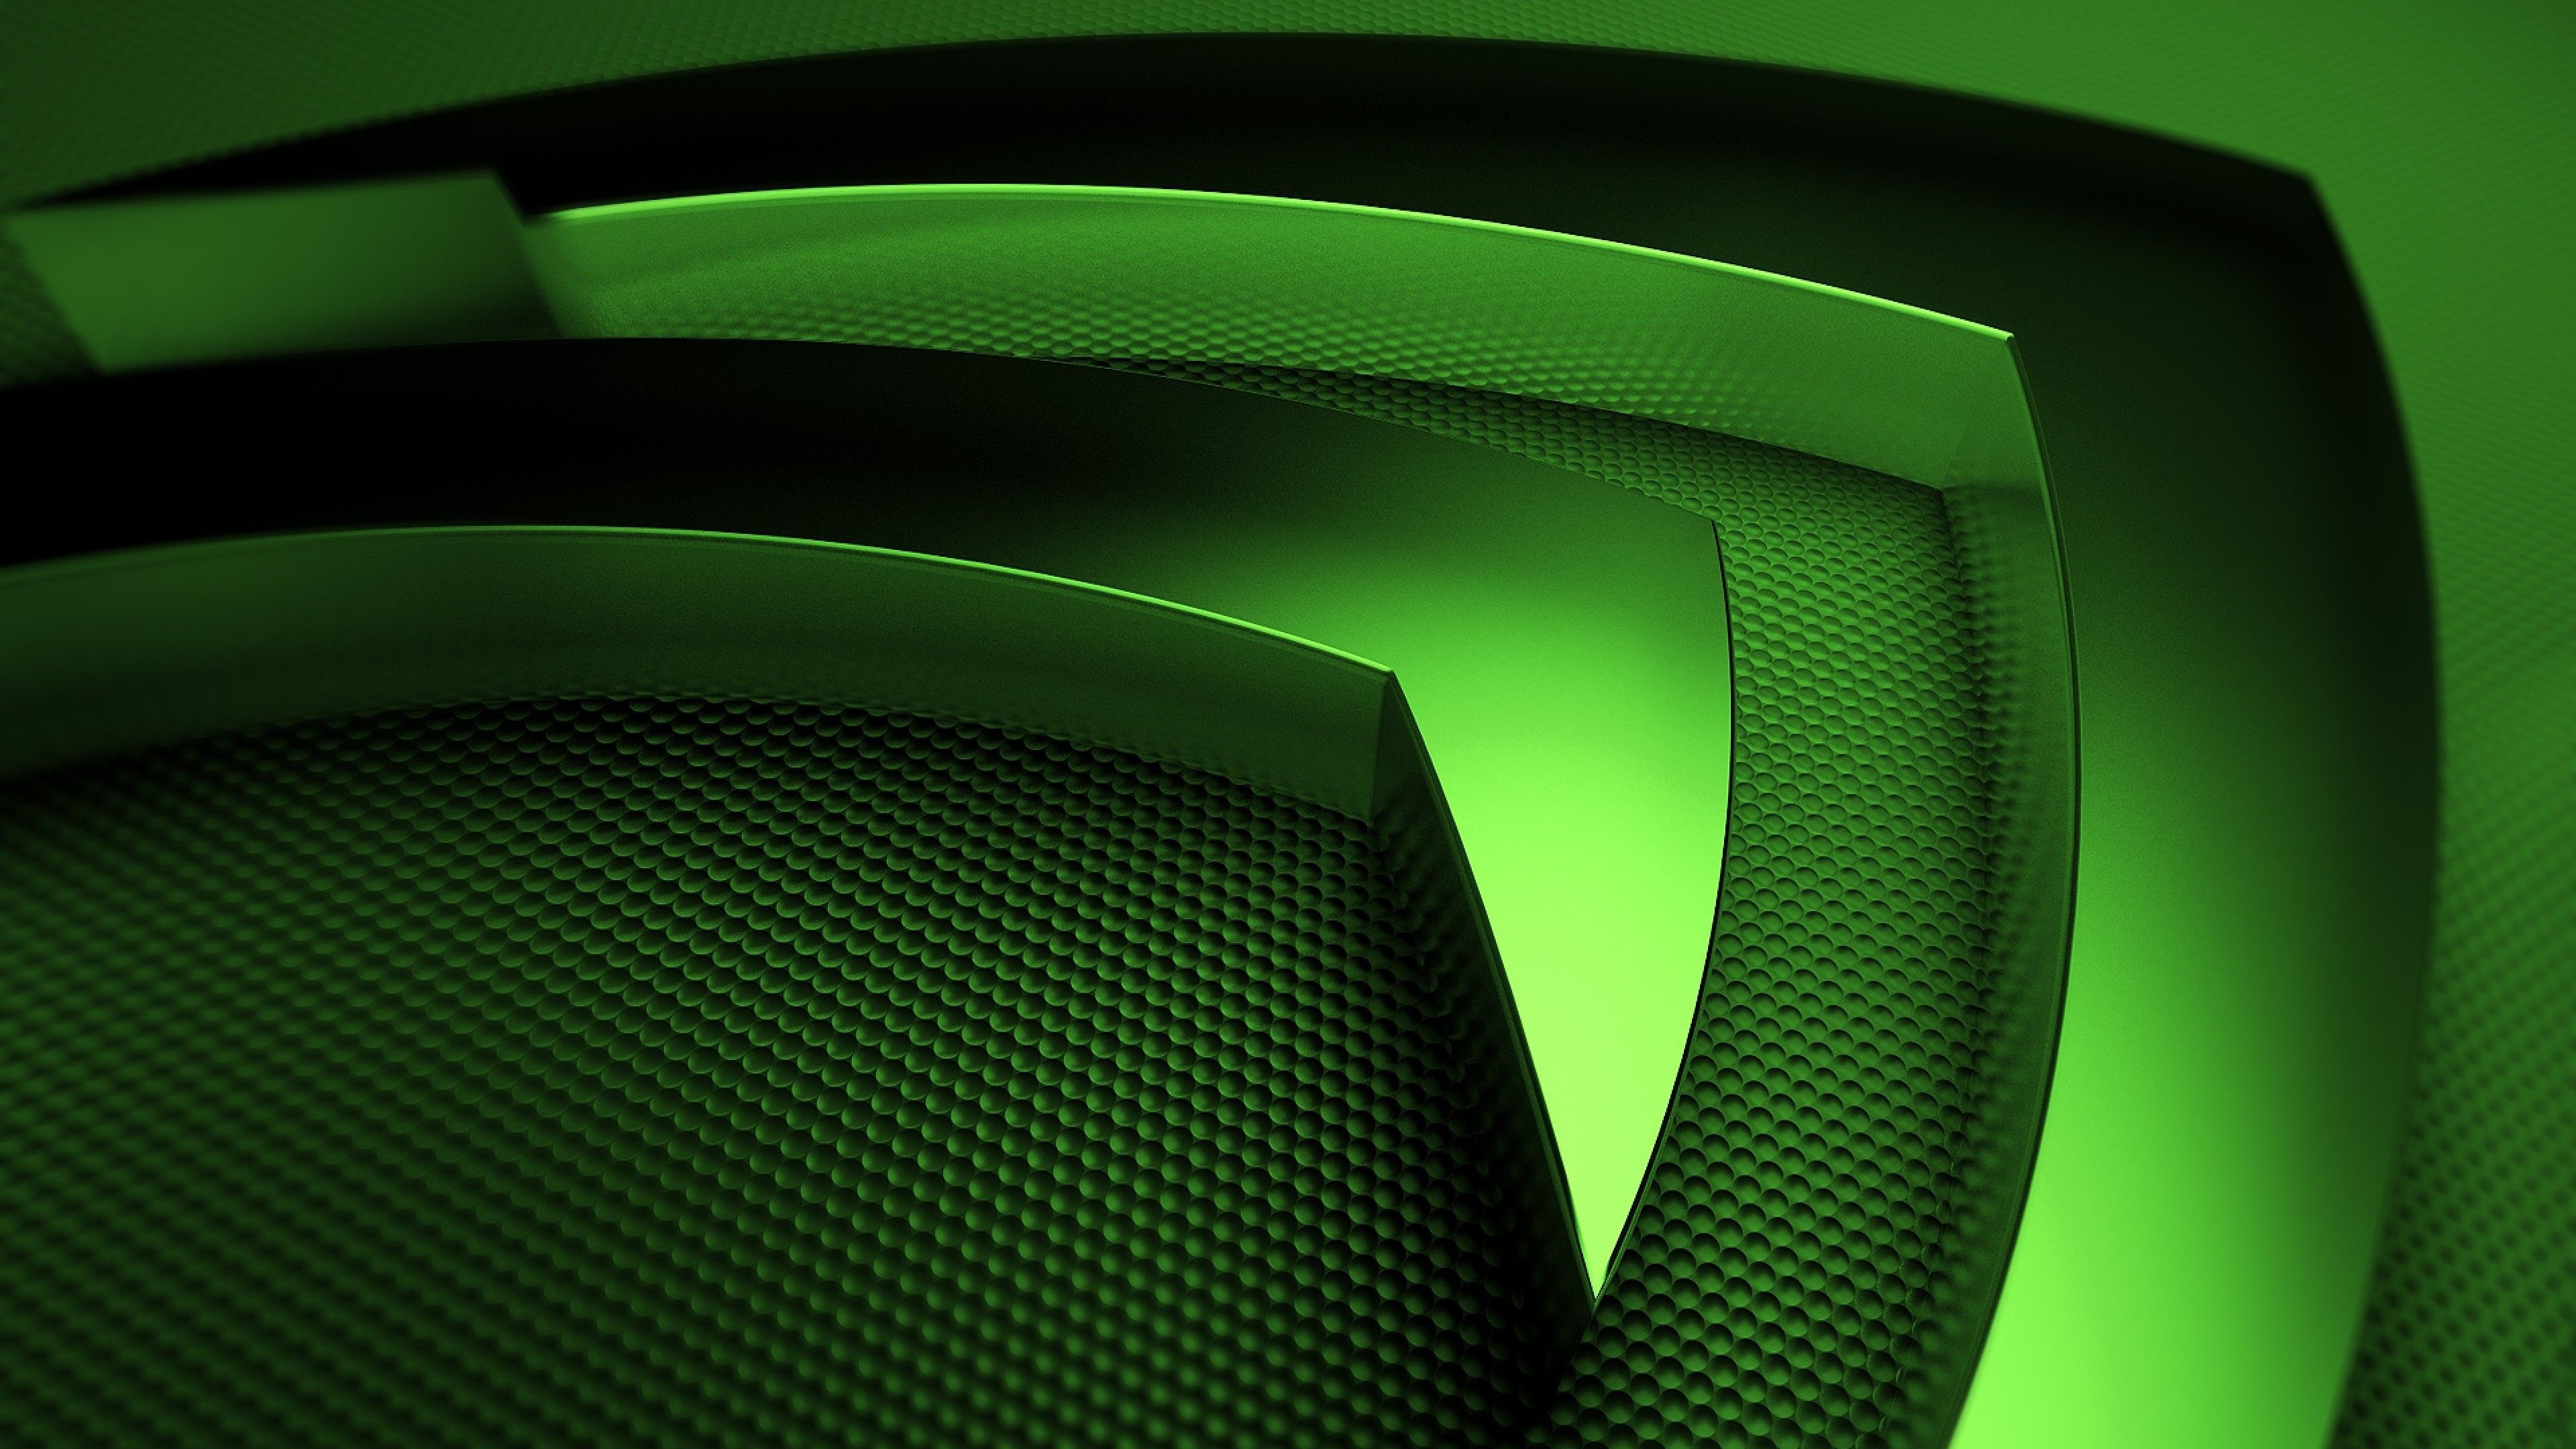 Backdrop: NVIDIA GTX, Green, Three-dimensional space, Reflections, Sharp angles. 3840x2160 4K Background.